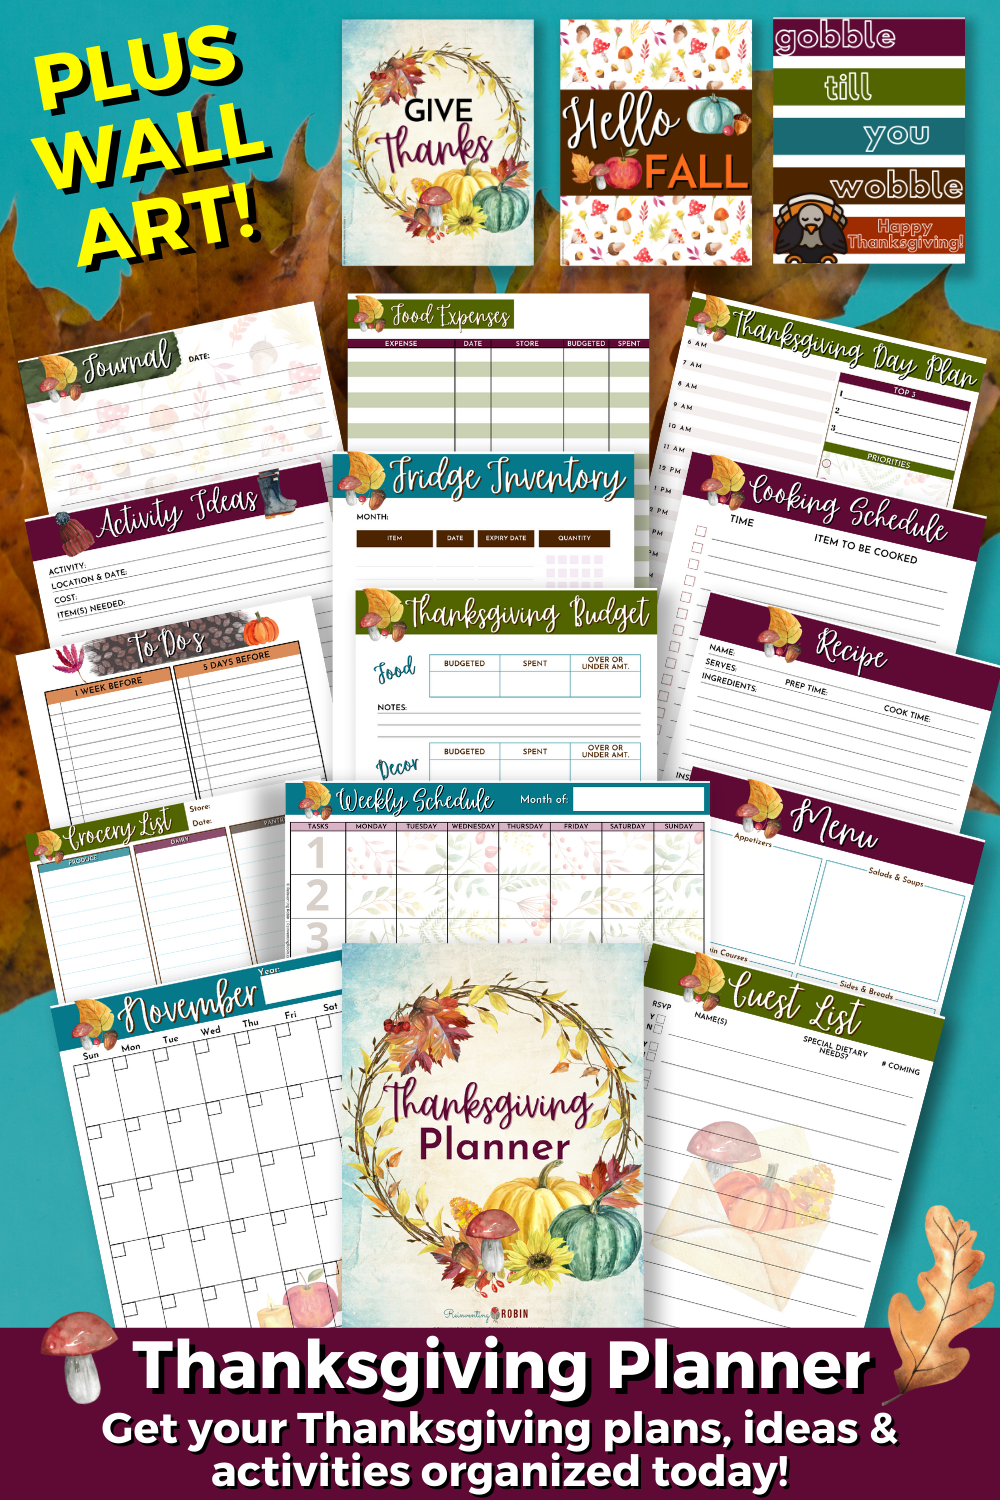 Picture of some of the pages of the Thanksgiving Planner and the 3 included wall art items. States Get your Thanksgiving plans, ideas & activities organized today!